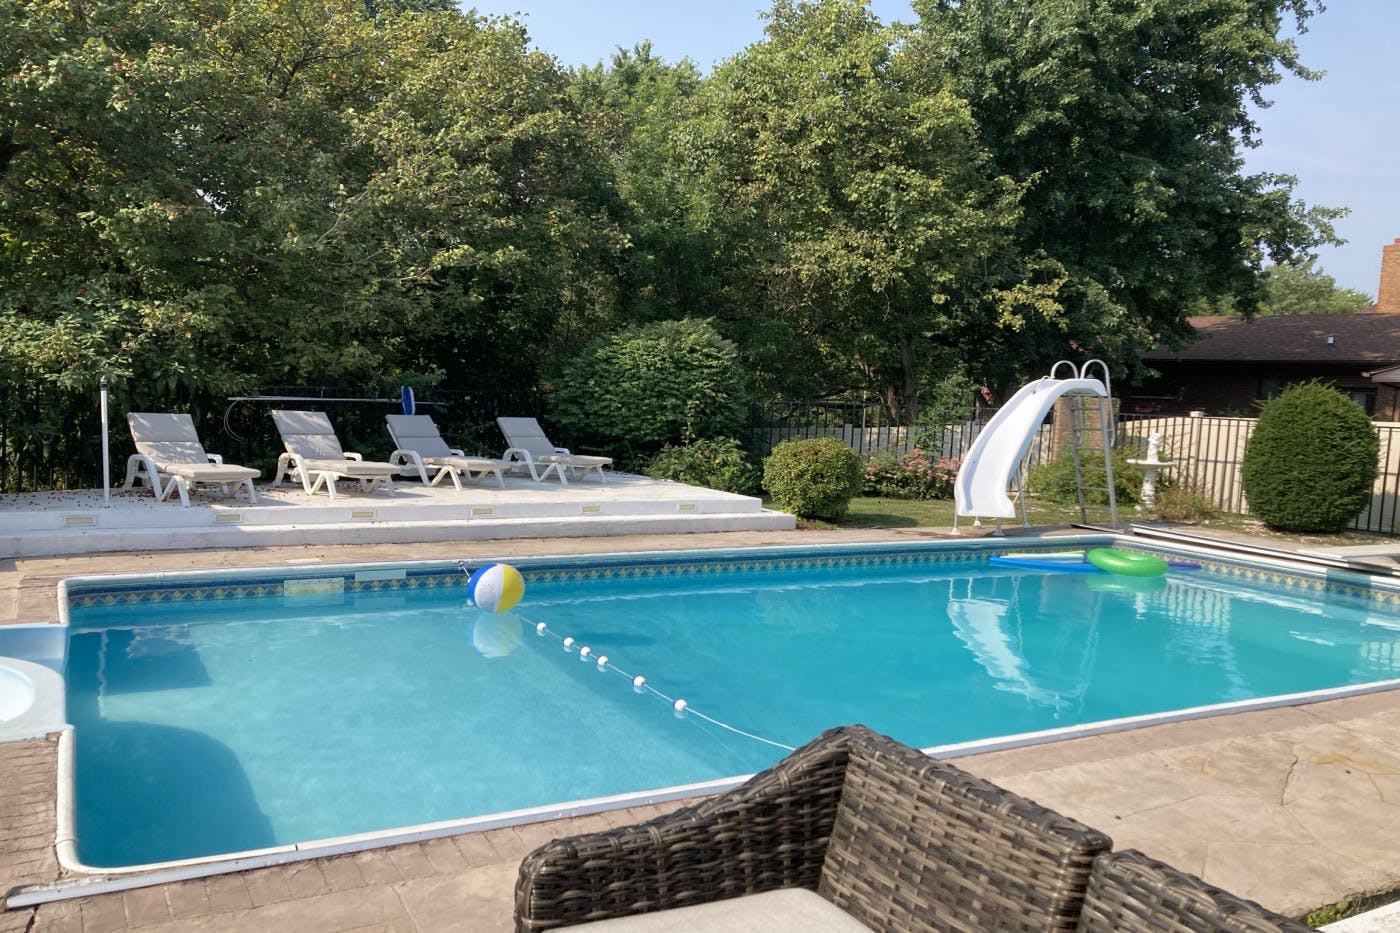 Swimming pool - heated/night lights/water fall/cobbleston deck/bench/tables /lawn chairs